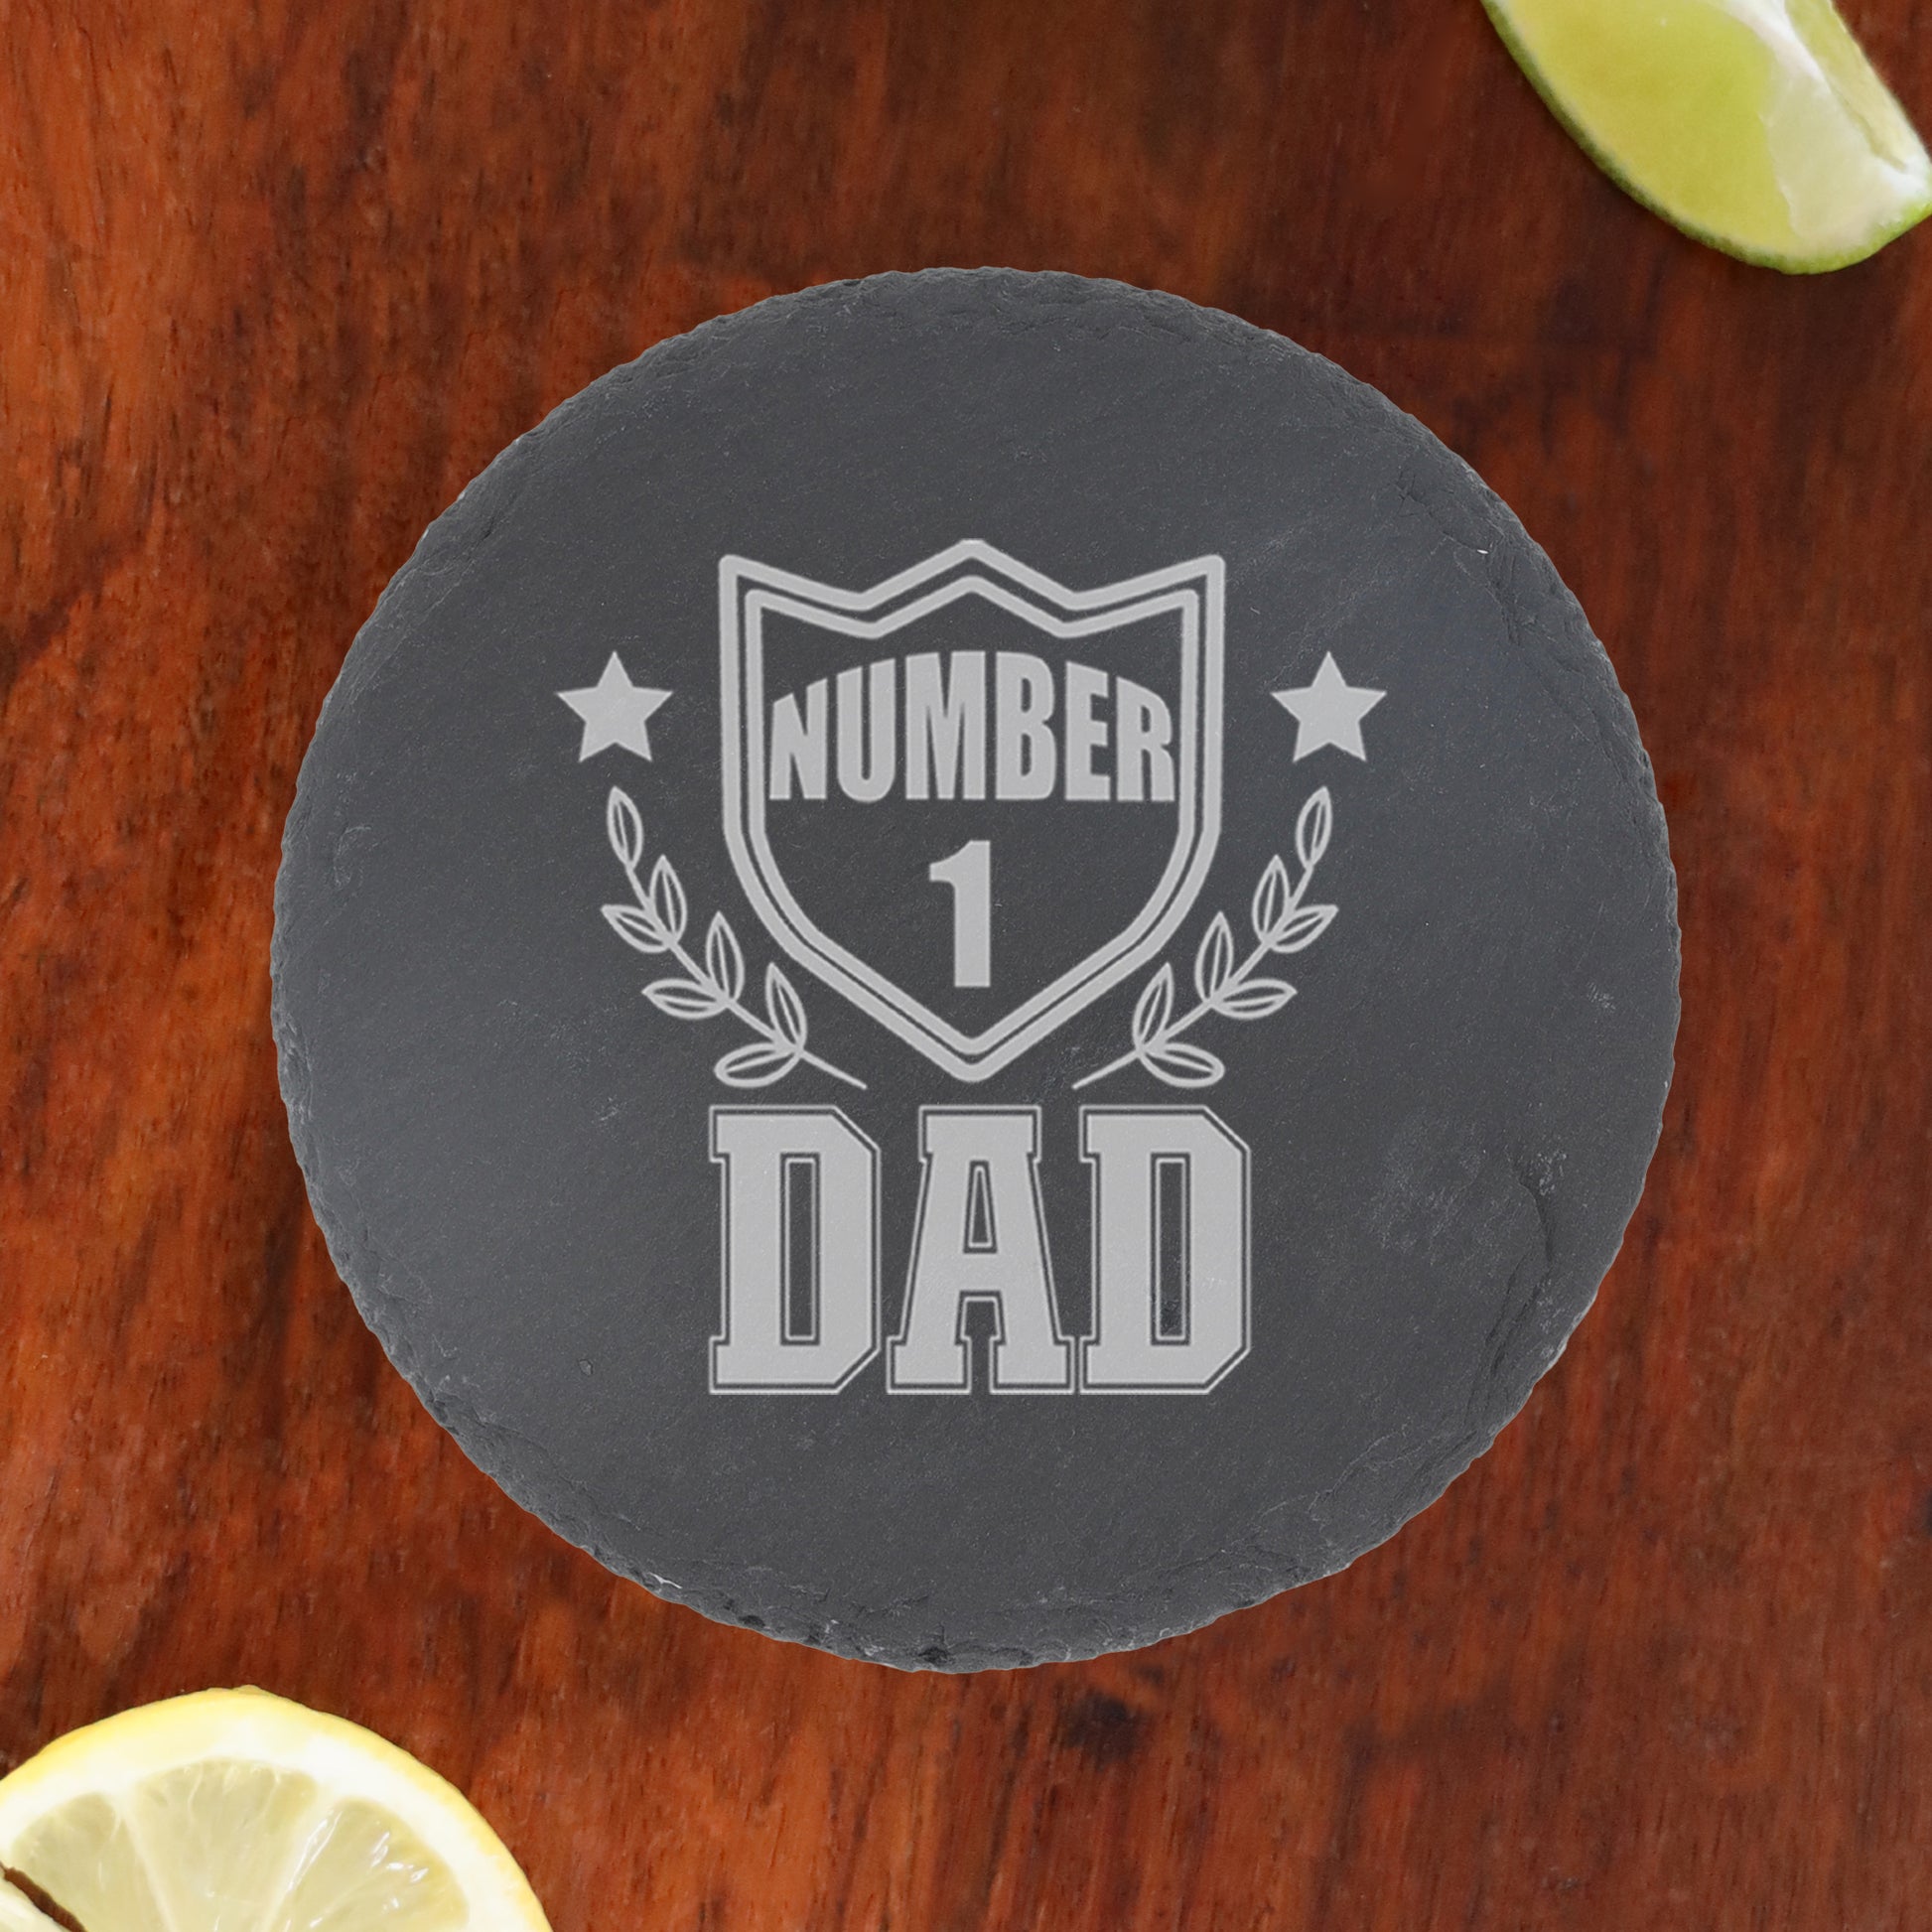 Engraved "Number 1 Dad" Wine Glass and/or Coaster Set  - Always Looking Good - Round Coaster Only  